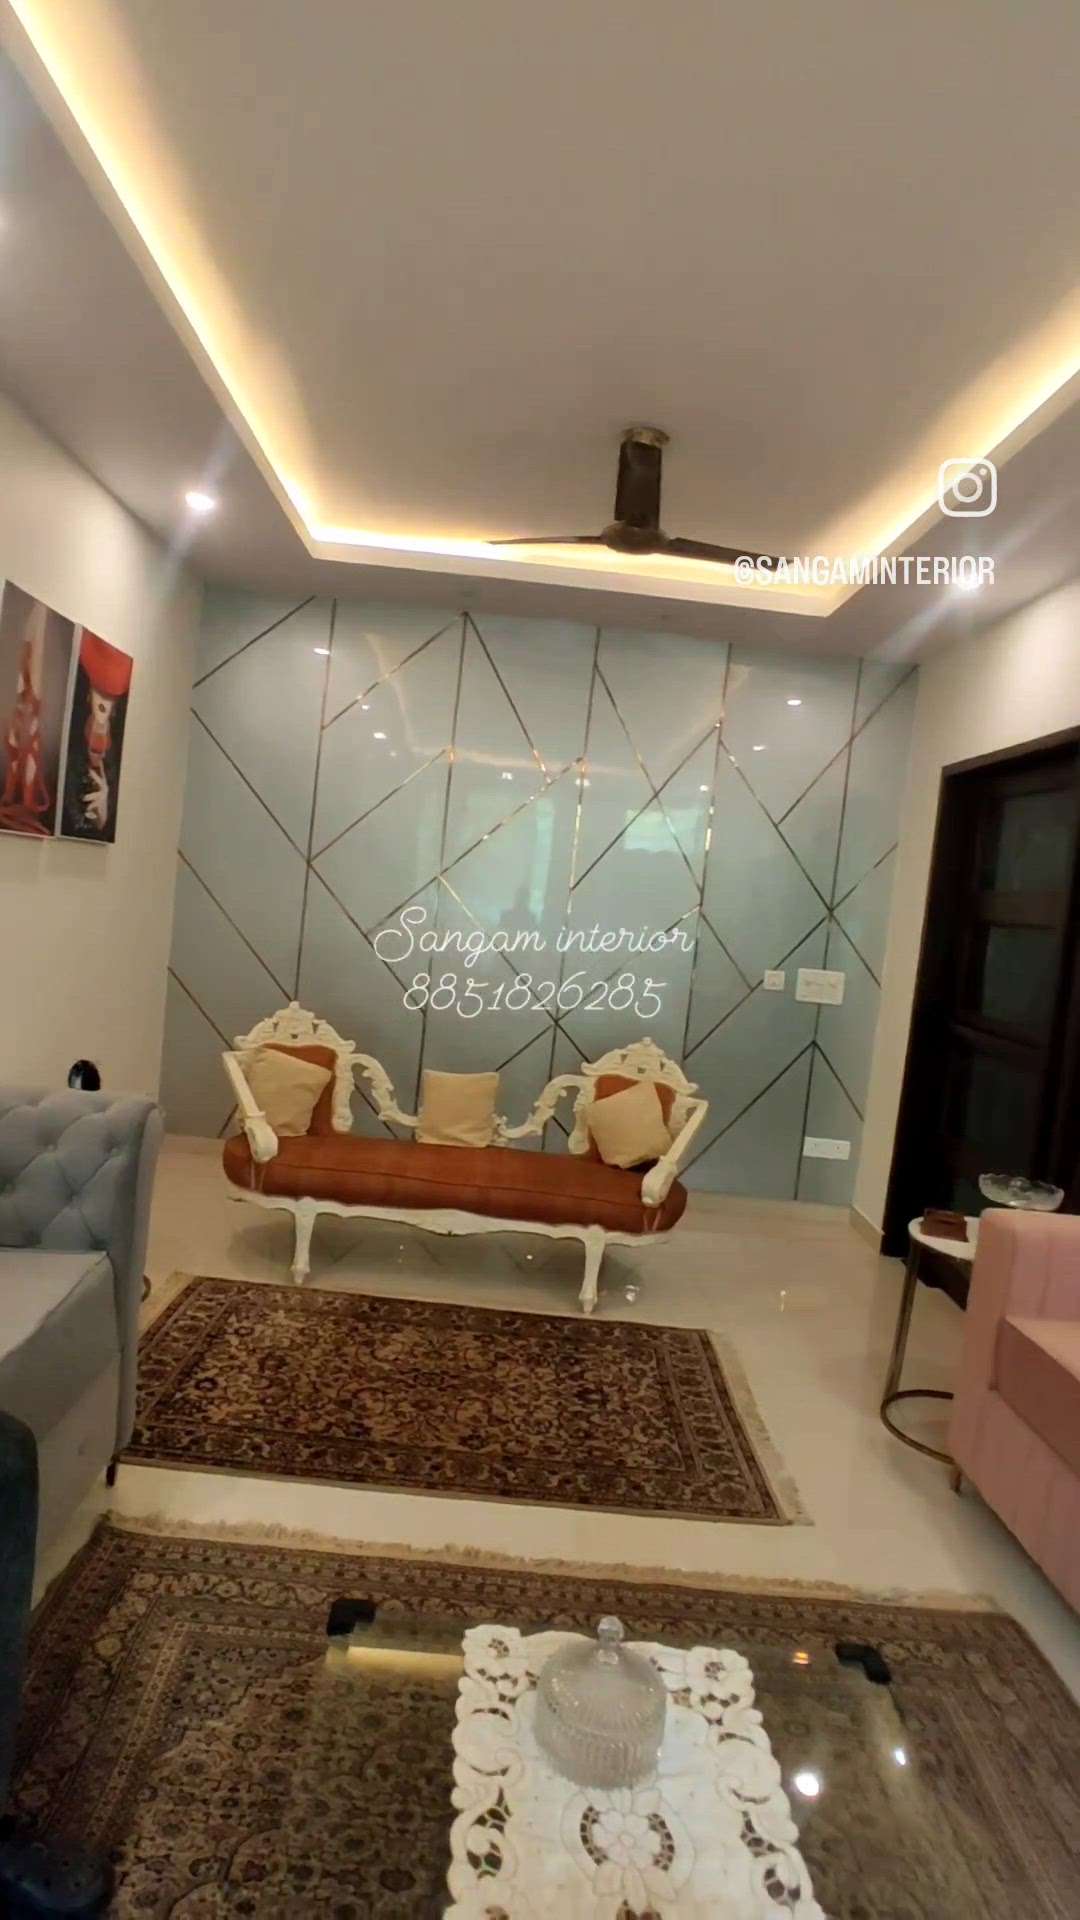 complete interior site in Eros Garden by sangam interior team.. if you need same interior work so please contact us 8851826285